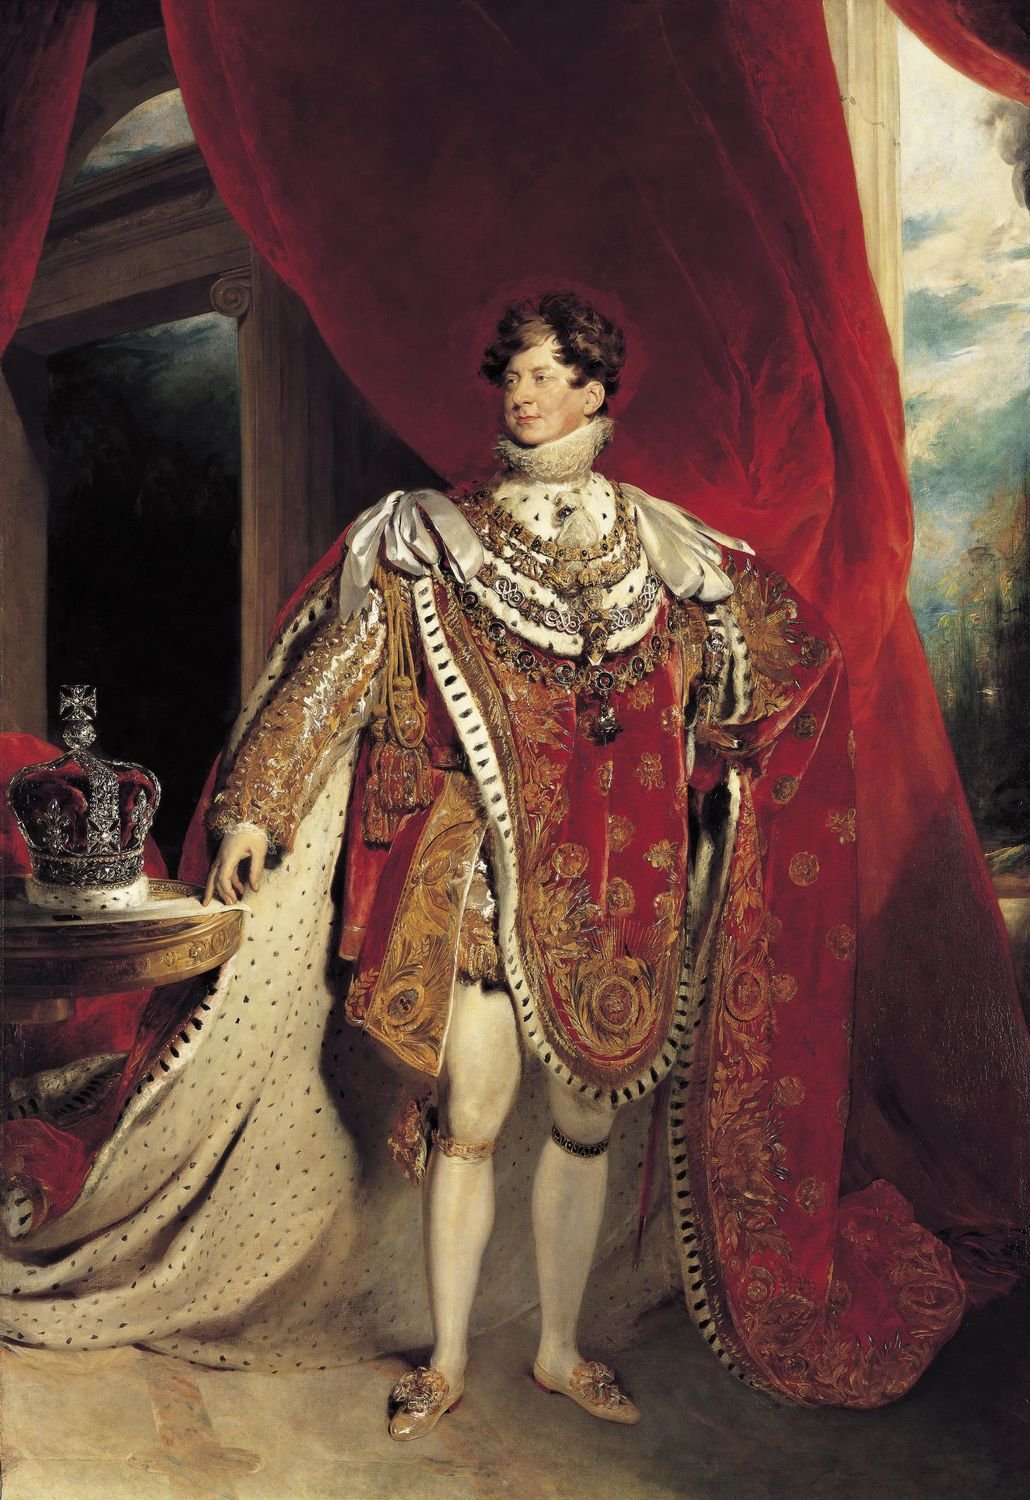 Portrait of King George IV by Thomas Lawrence